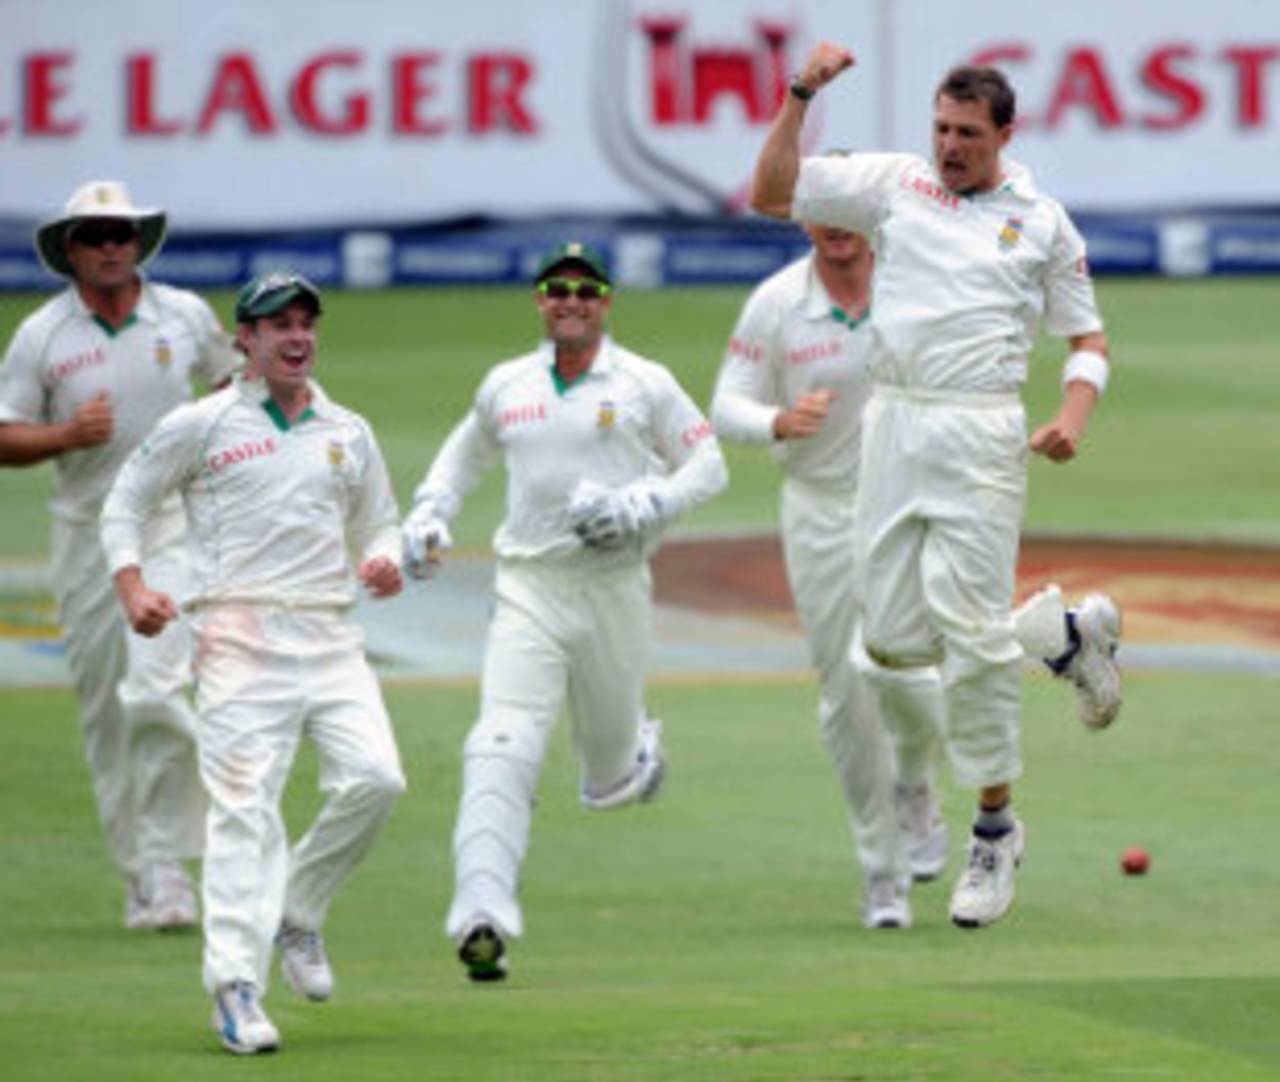 Dale Steyn's five wickets put South Africa on top on day one at the Wanderers, South Africa v England, 4th Test, Johannesburg, South Africa, January 14, 2010